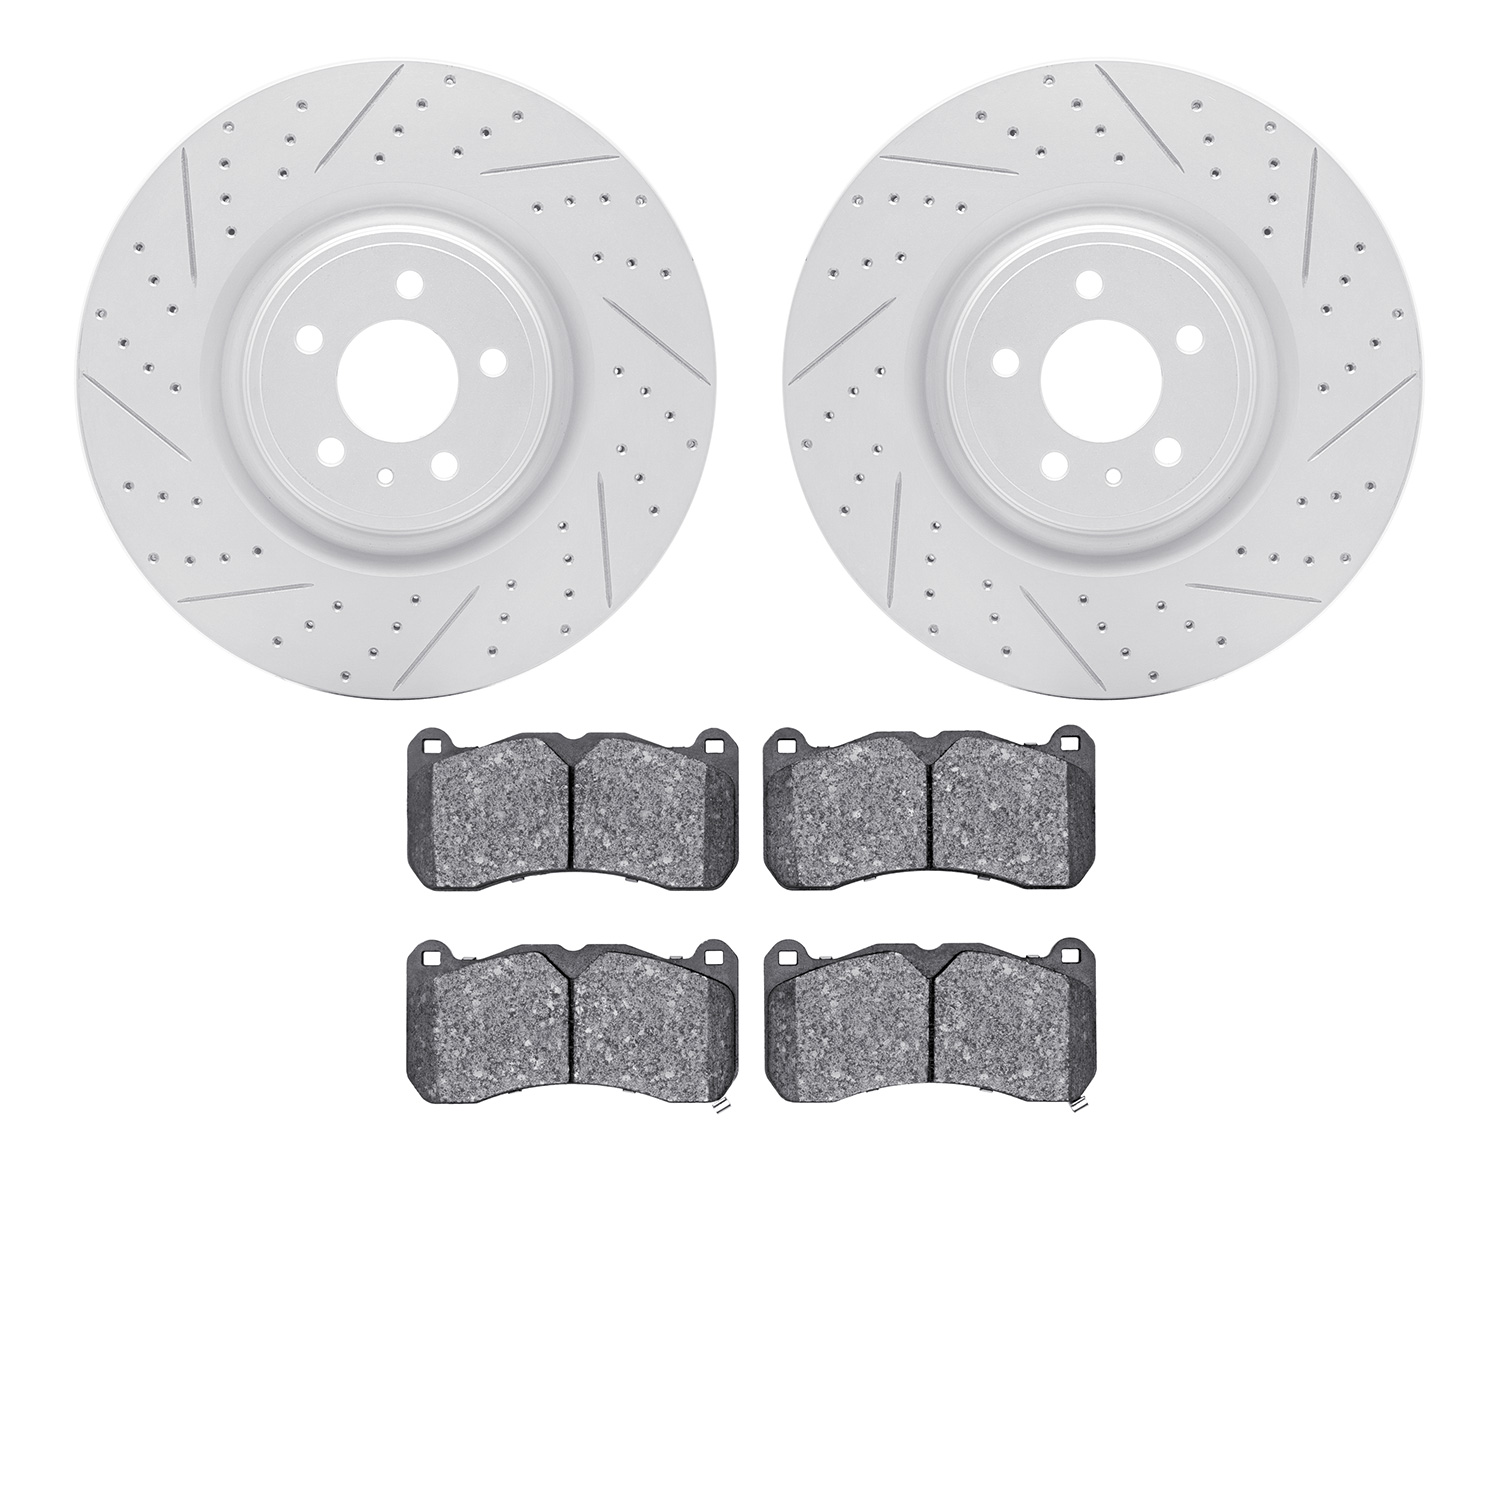 2502-54073 Geoperformance Drilled/Slotted Rotors w/5000 Advanced Brake Pads Kit, 2013-2014 Ford/Lincoln/Mercury/Mazda, Position: